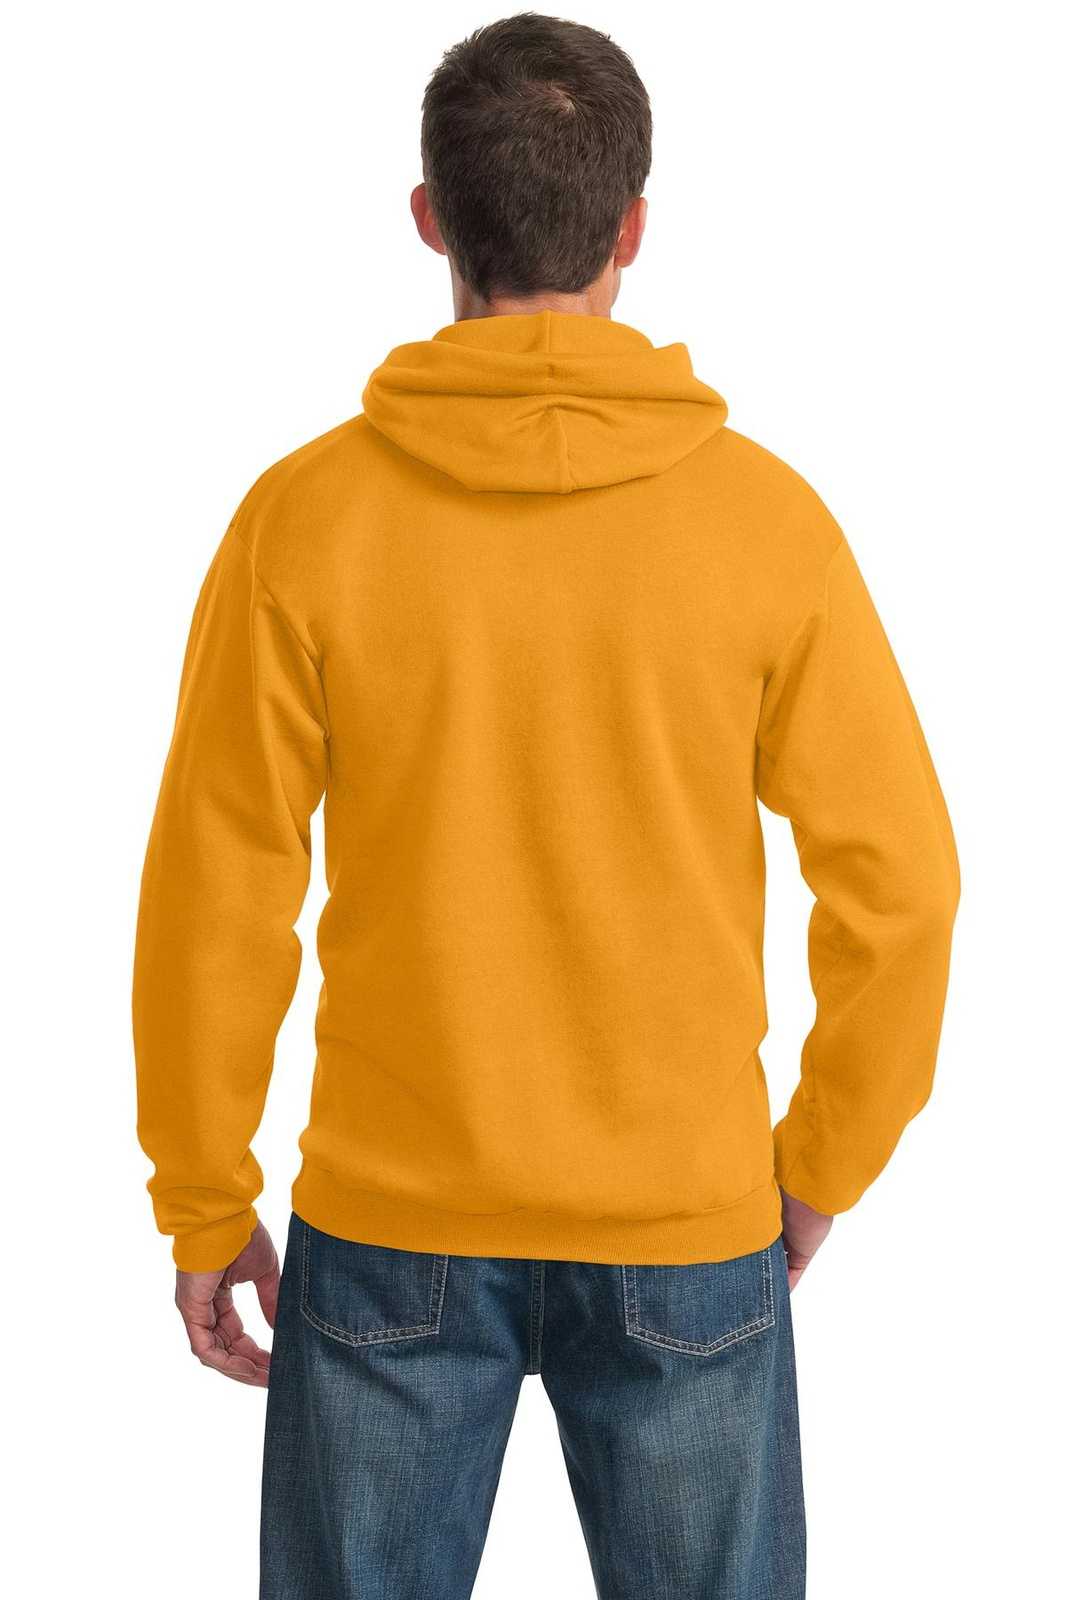 Port & Company PC90H Essential Fleece Pullover Hooded Sweatshirt - Gold - HIT a Double - 1